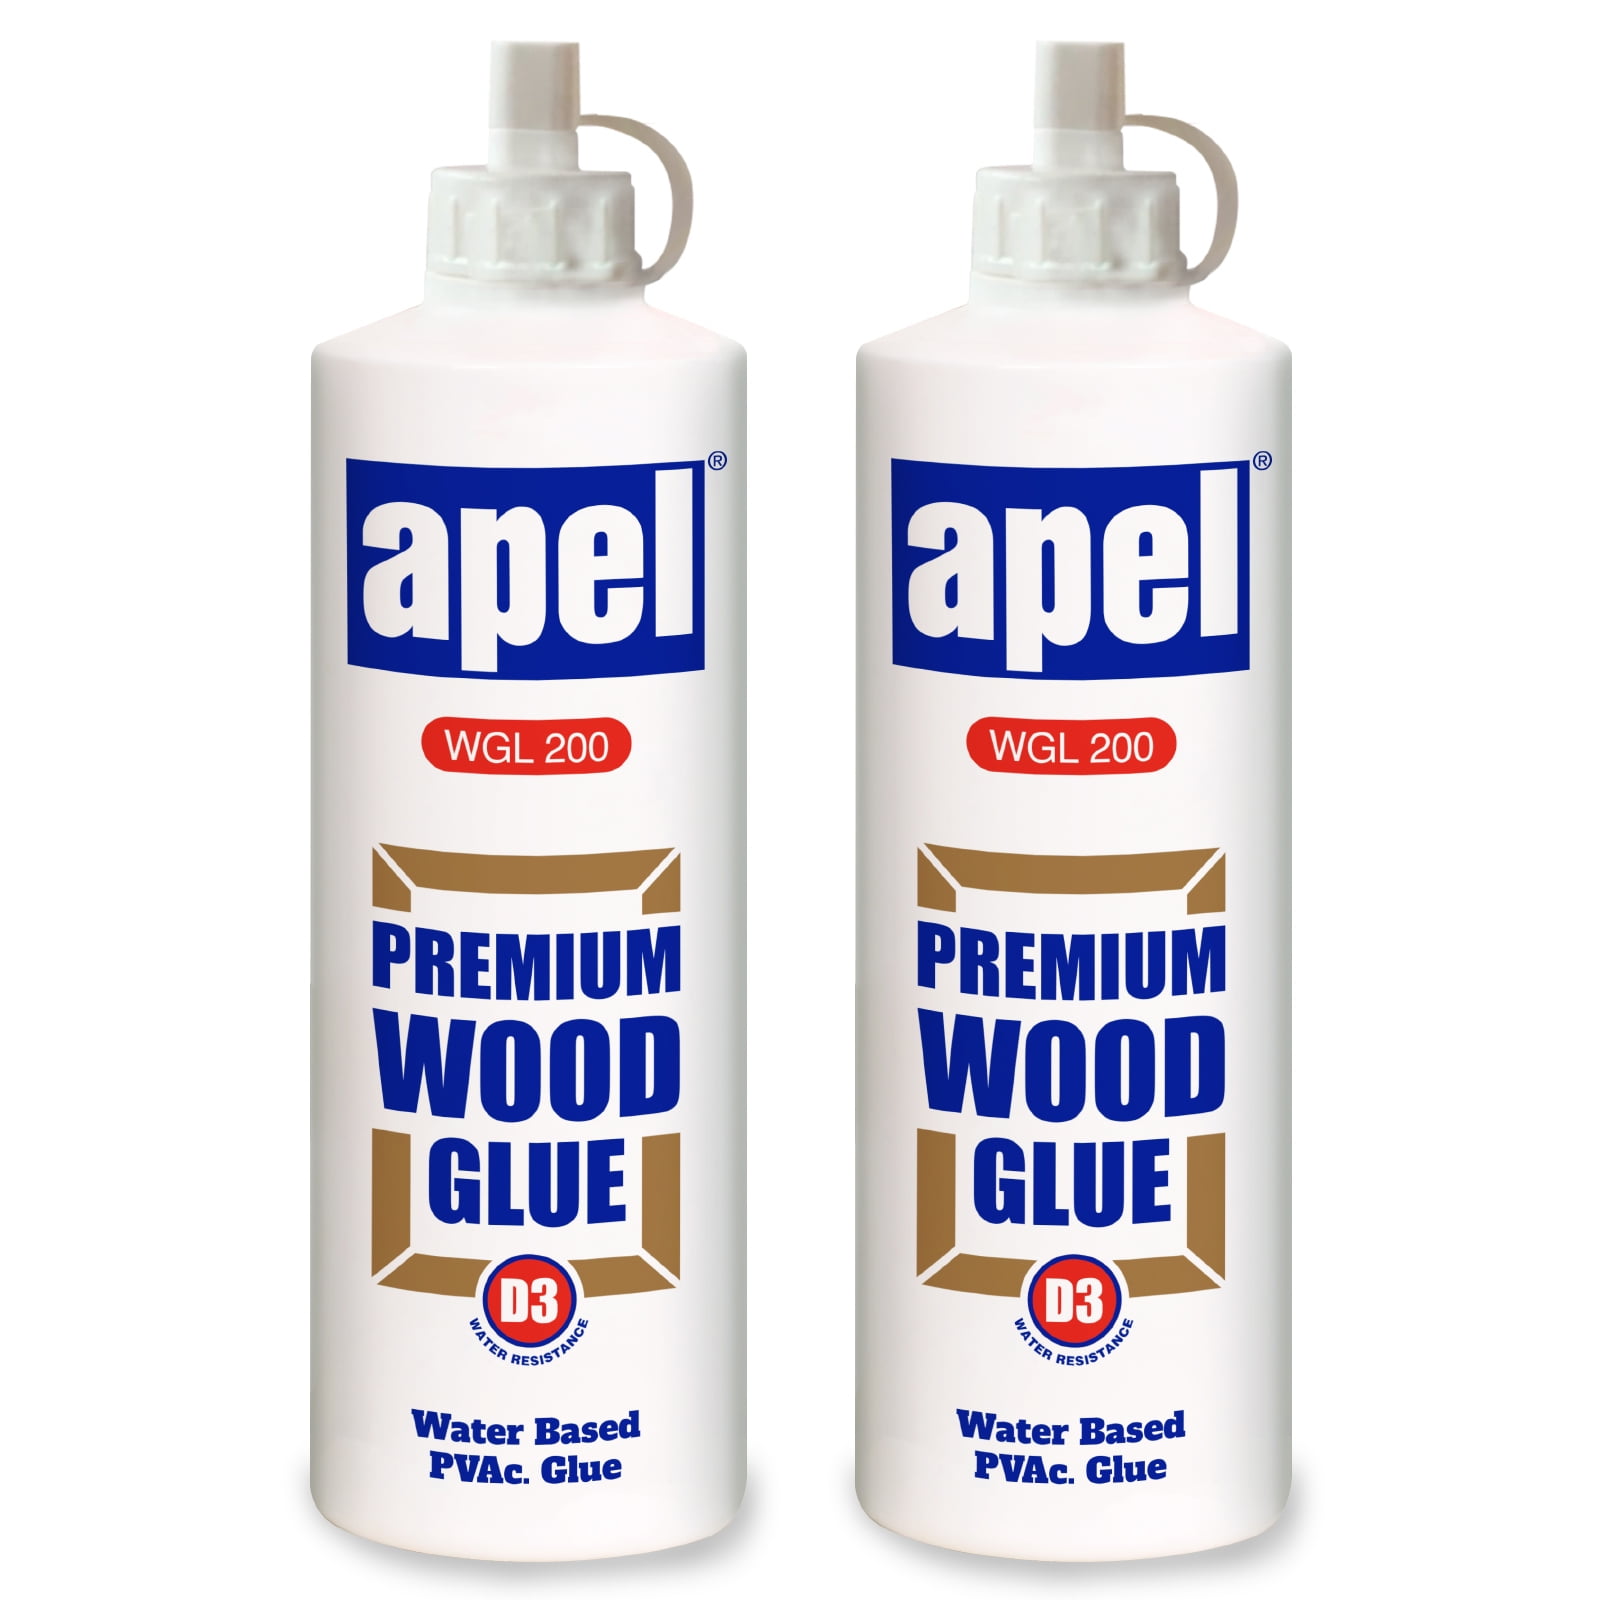 Wood Glue For Woodworking And Hobbies, Extra Strength For Crafts, 16 oz./1  pound, Water Based Clear PVA Glue For Interior & Exterior, Low Viscosity (4